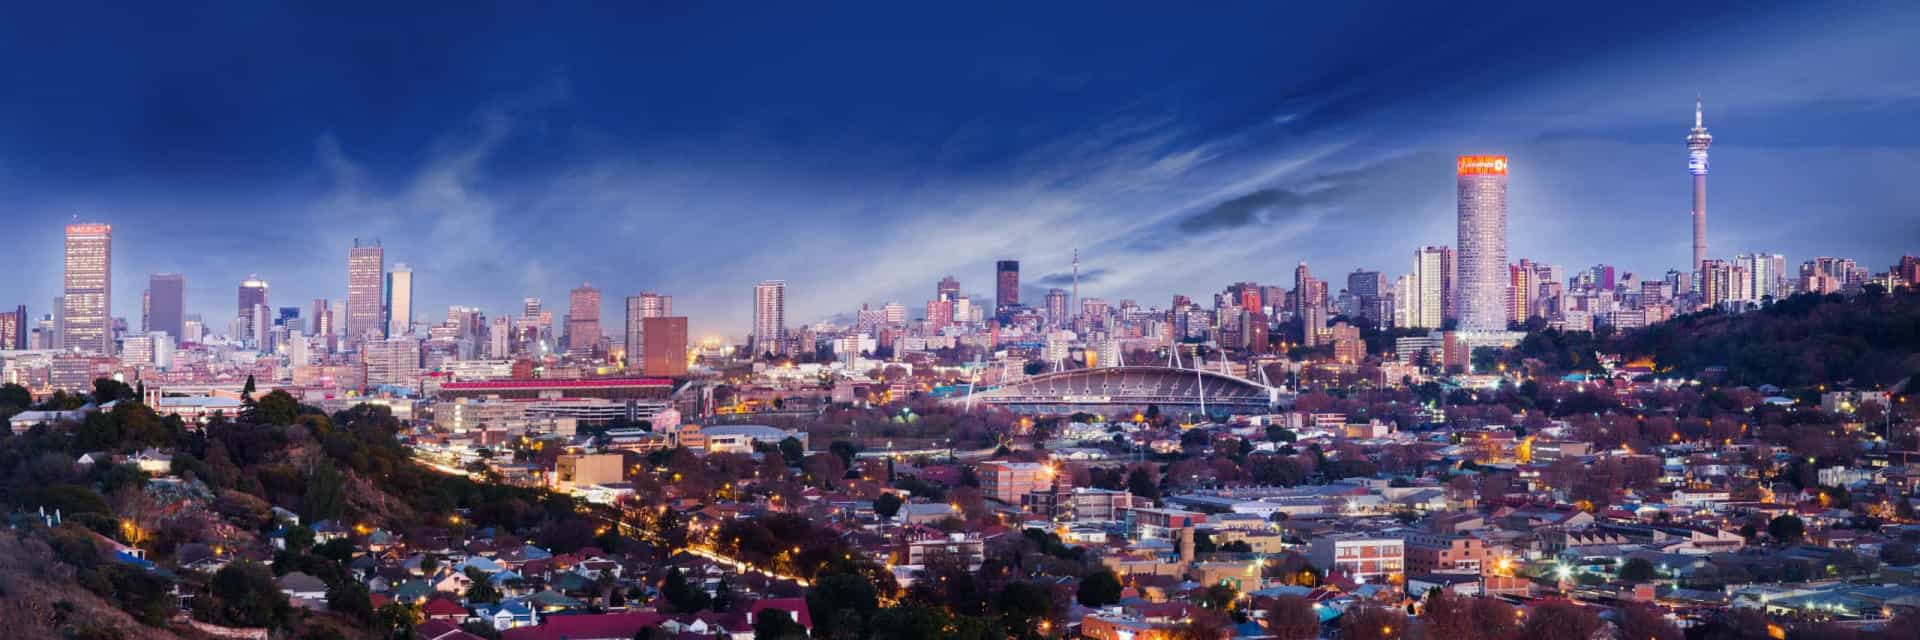 <p>Just like the Scorpio's nature, they will appreciate a place that has the power to survive and thrive through difficult times. A city like Johannesburg reflects that, and it will be a magnificent discovery to dive into.</p>